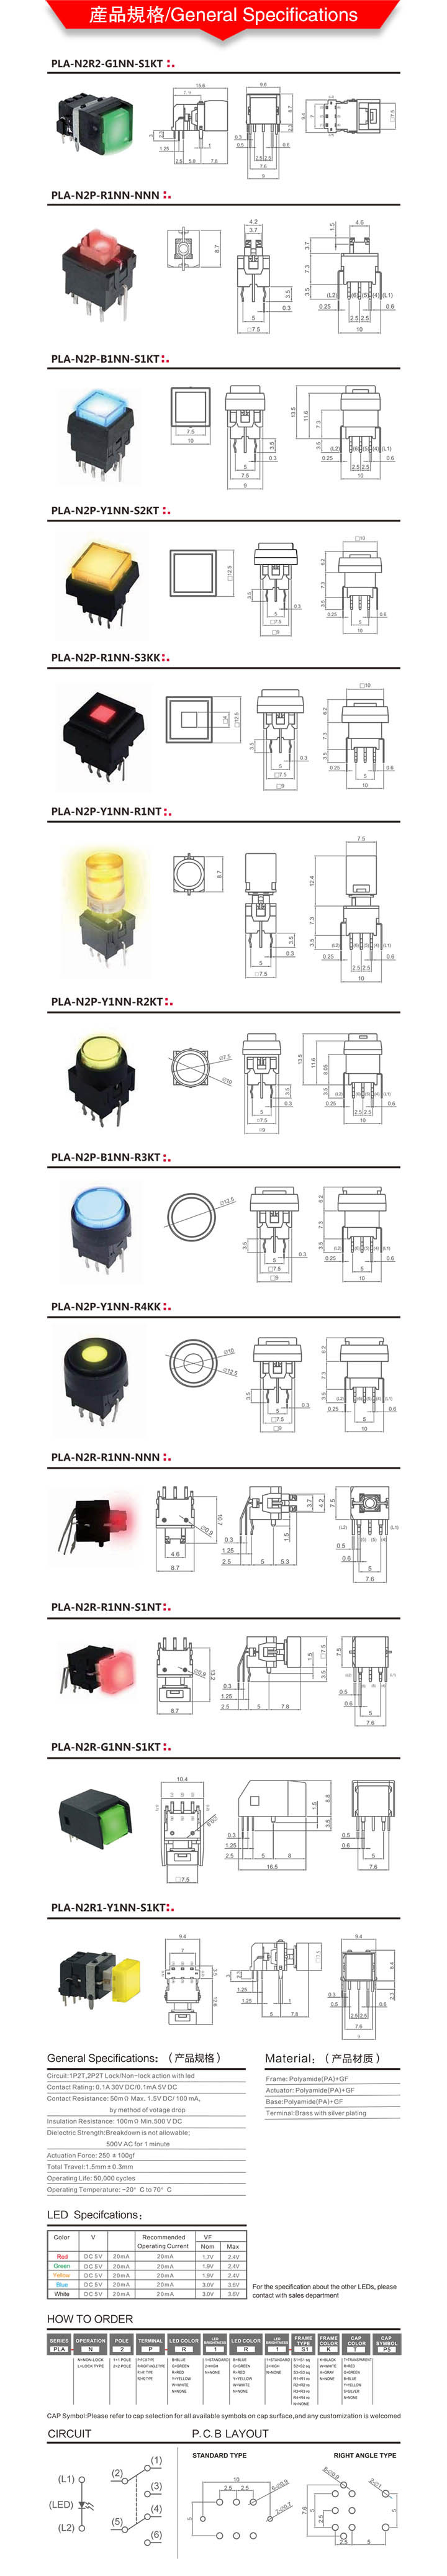 Stop Buttons Pushbutton Light Switch for Industrial